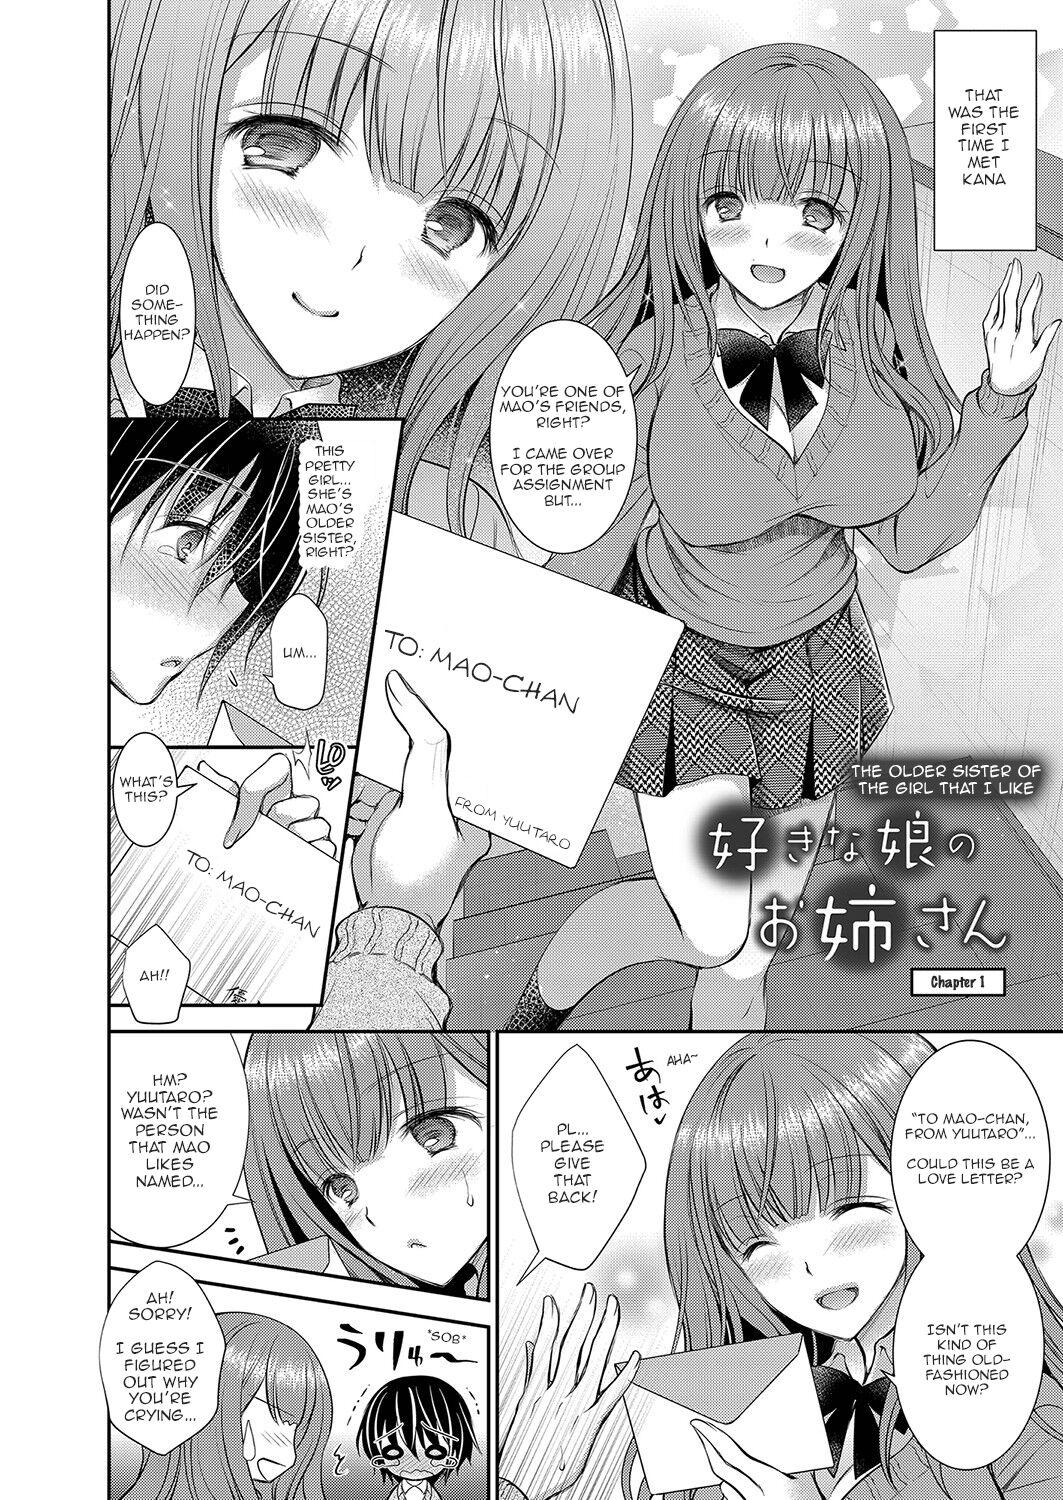 Housewife [Oreiro] Suki na Ko no Onee-san | The Older Sister of the Girl That I Like Ch1-6 + Special [English] [spicykestrel] [Digital] Perra - Page 4